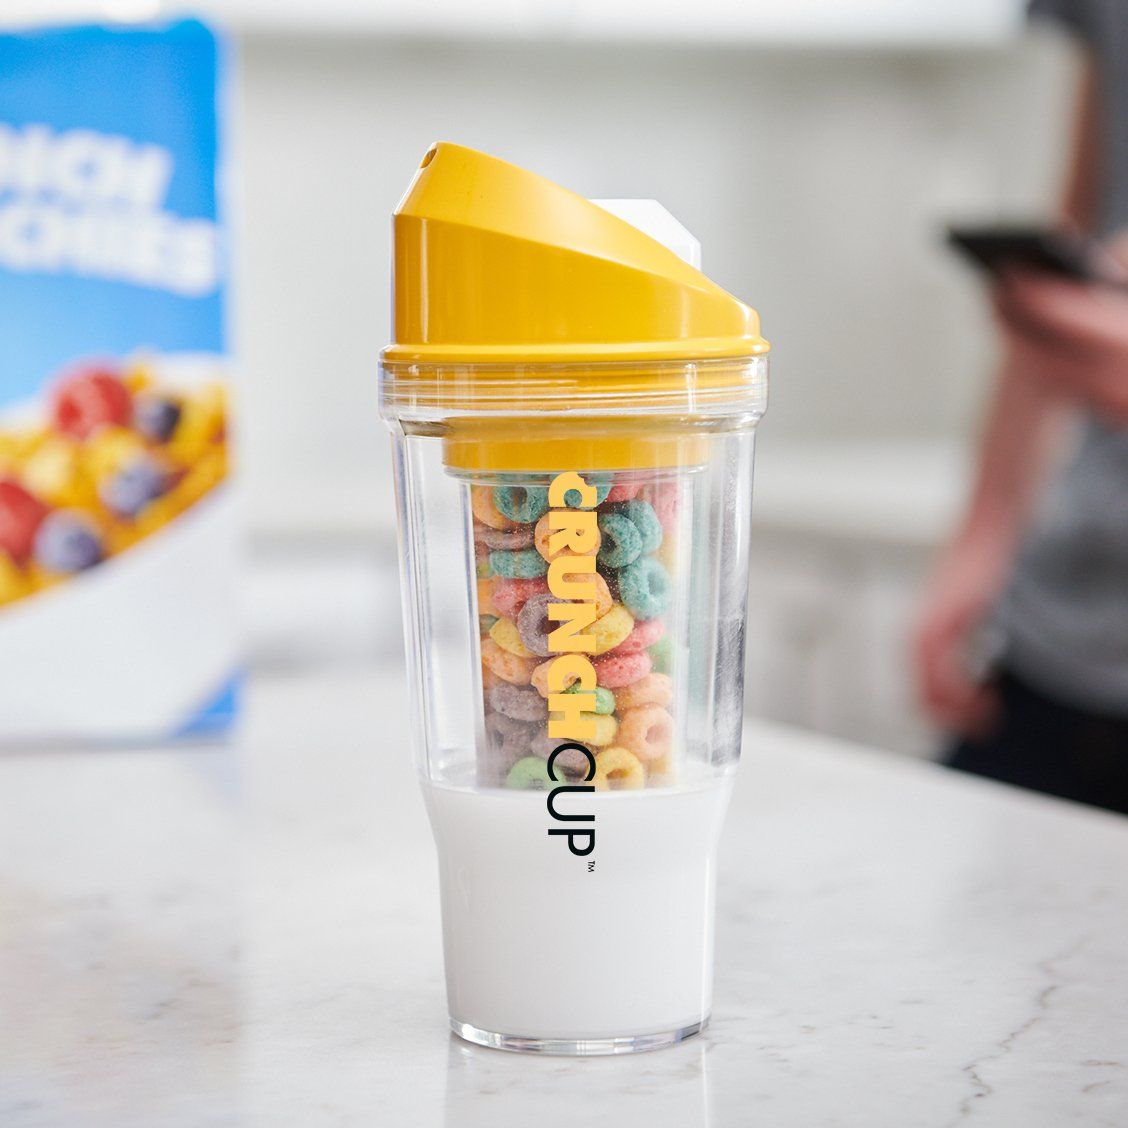 This Divided Milk and Cereal Cup Lets You Eat Breakfast While On The Go